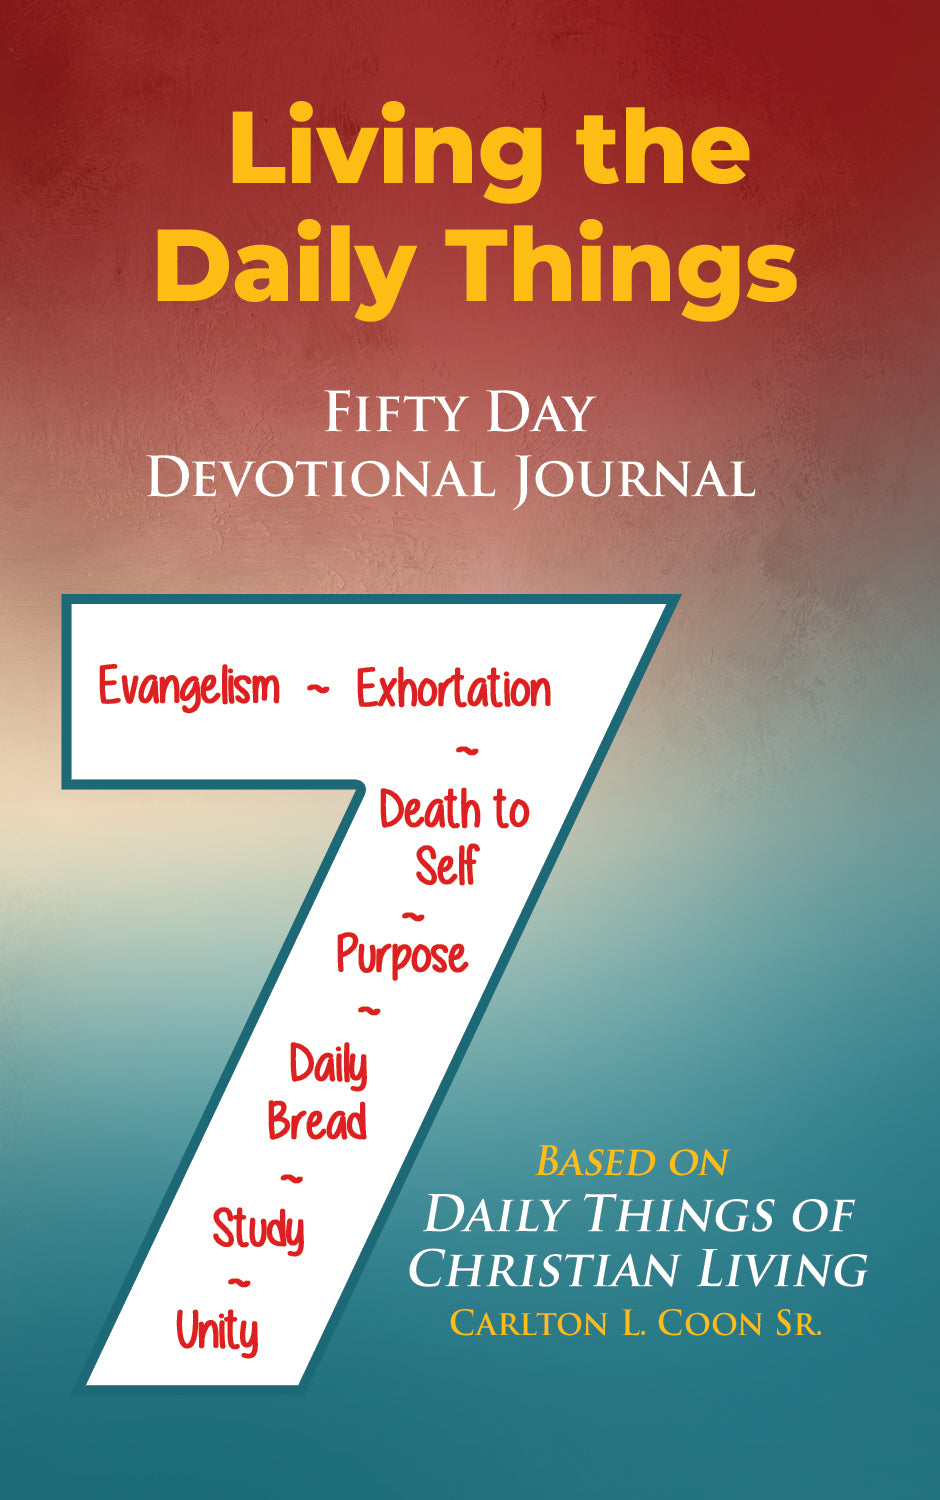 Living the Daily Things - Fifty Day Devotional Journal (PDF)